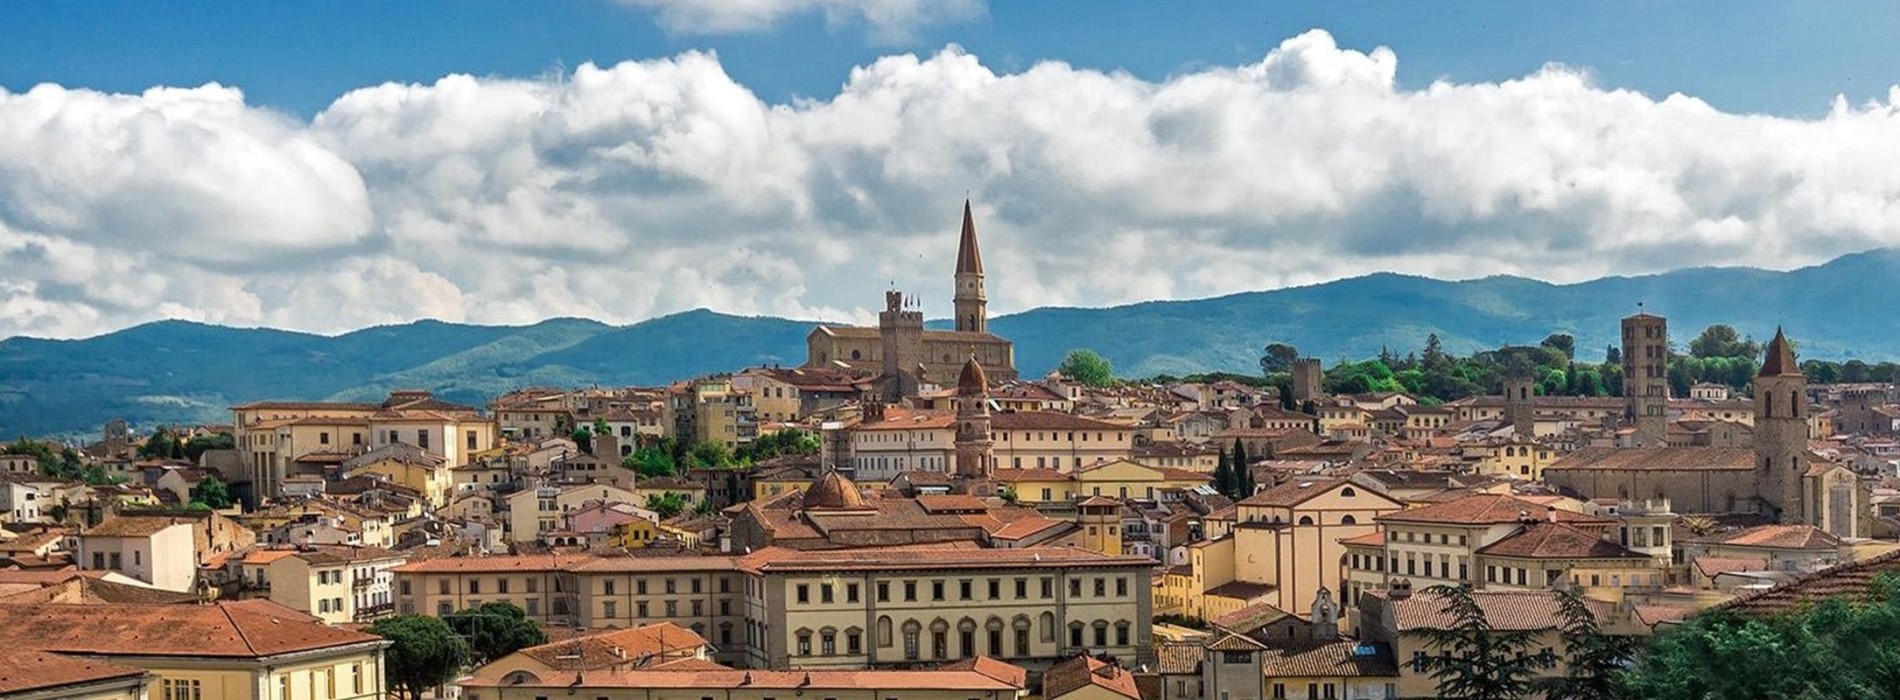 So many lovely places to visit in Tuscany when you are not cooking!